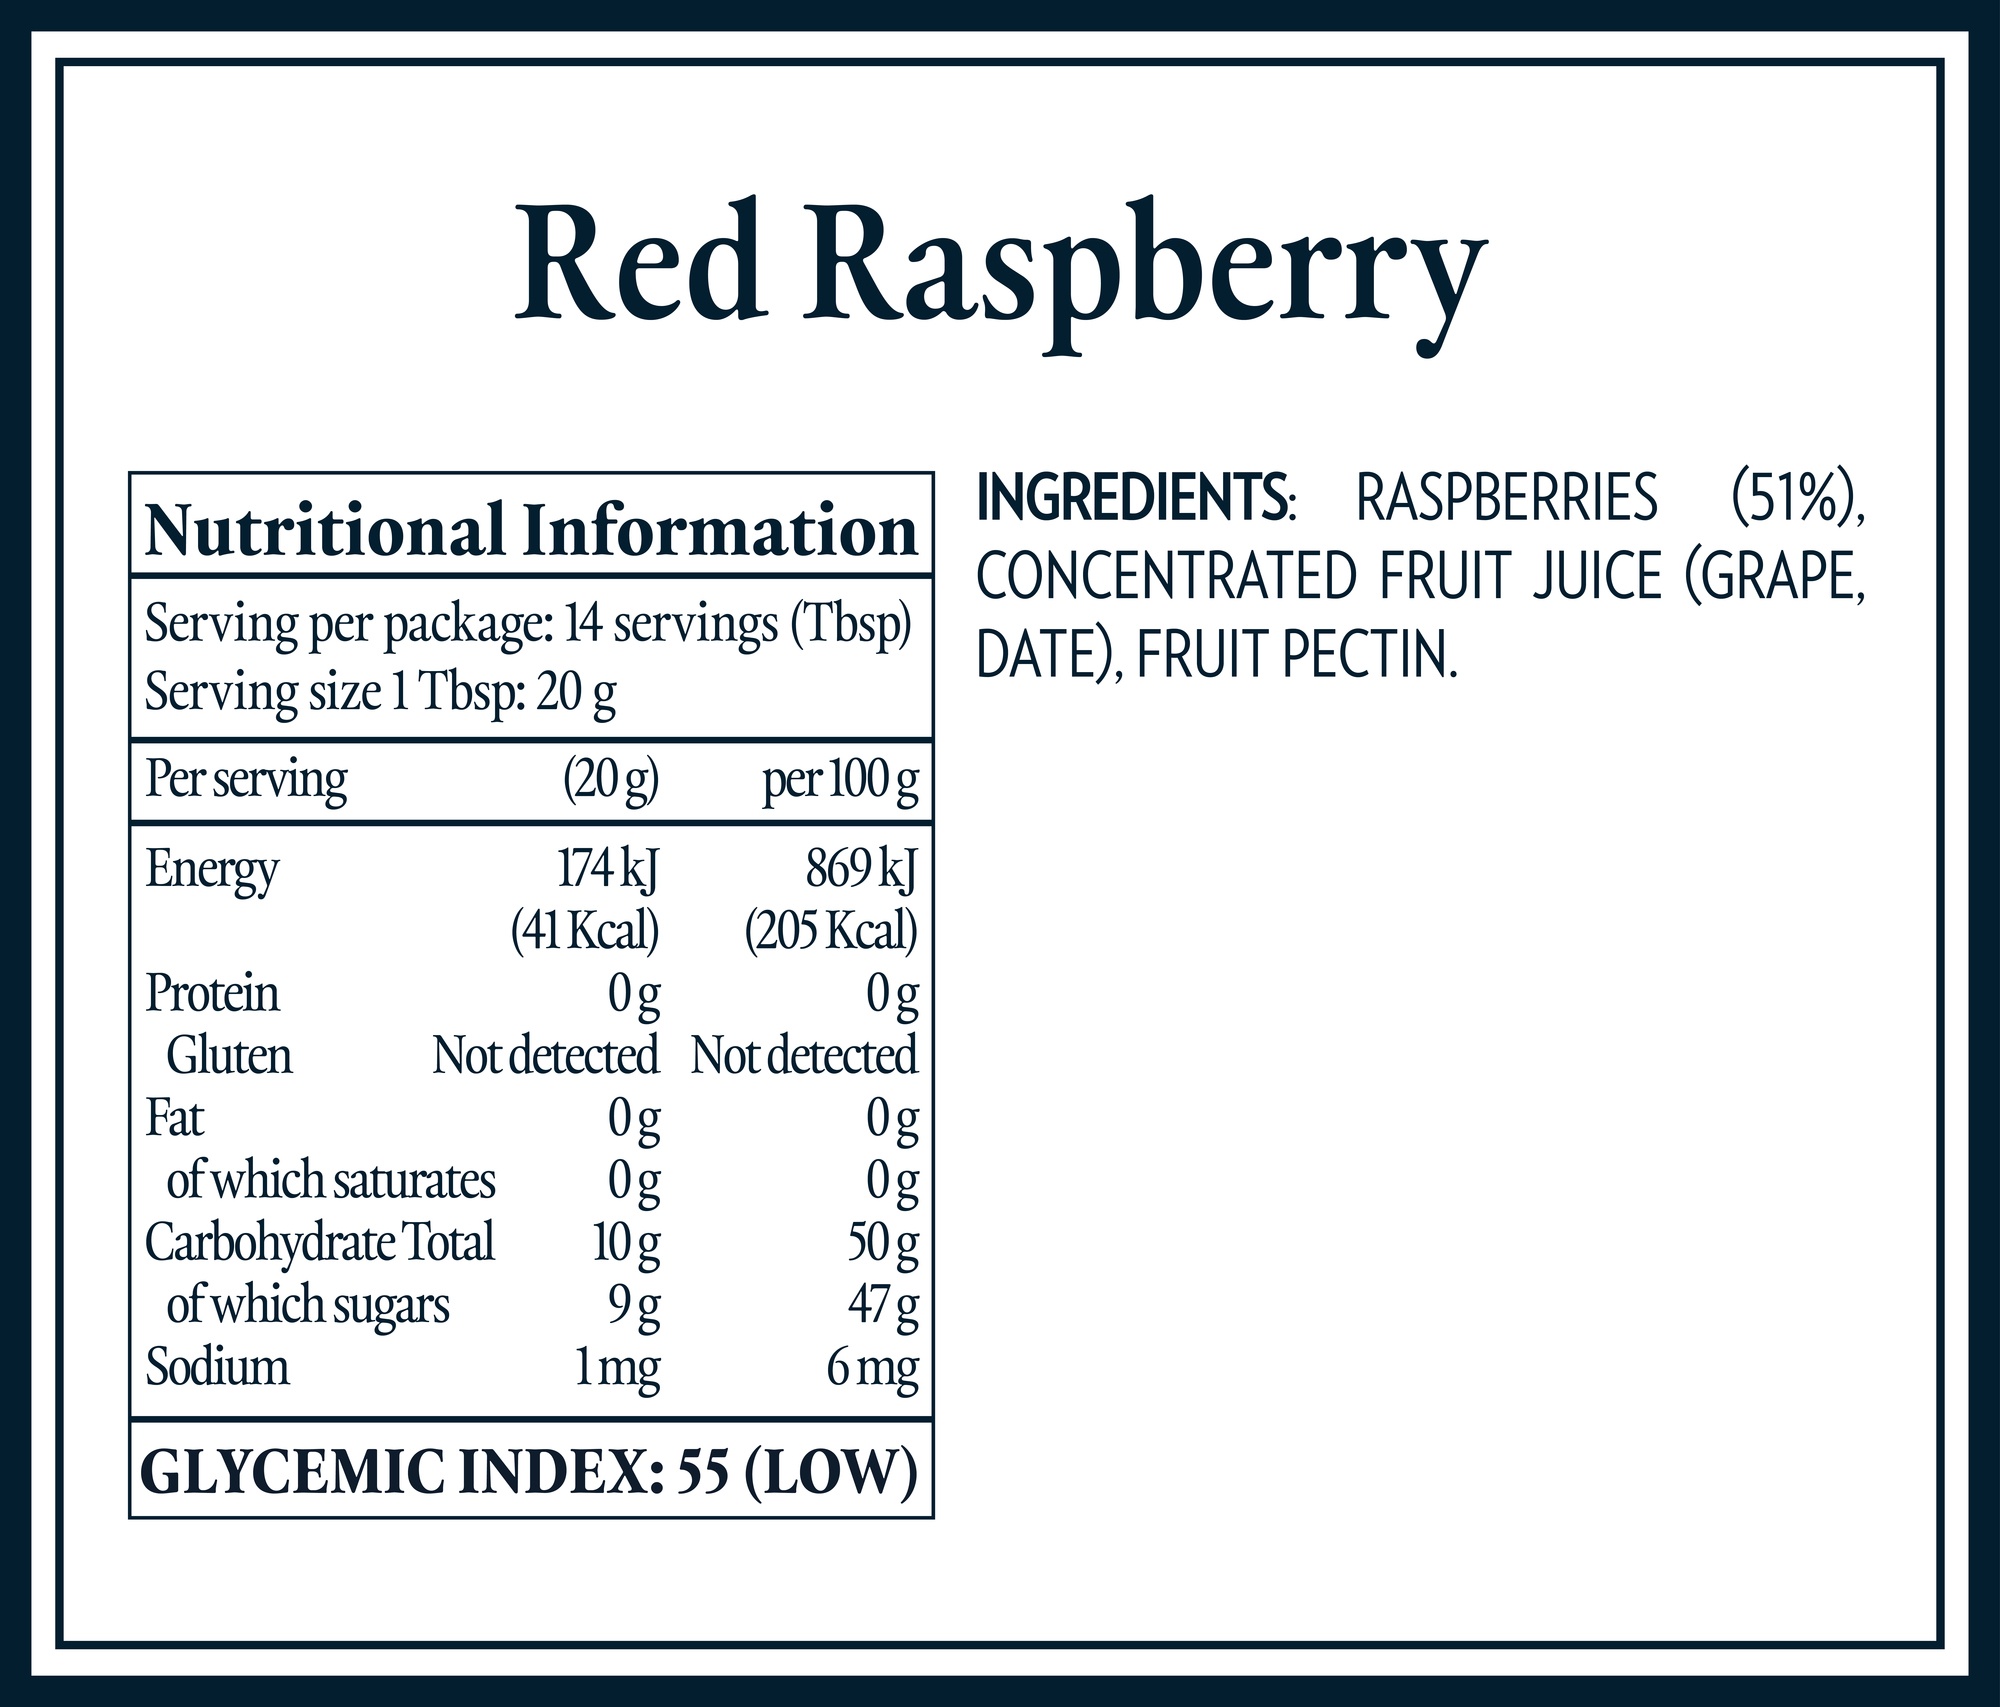 Nutrition Tables & Ingredients 2_AUS_red raspberry